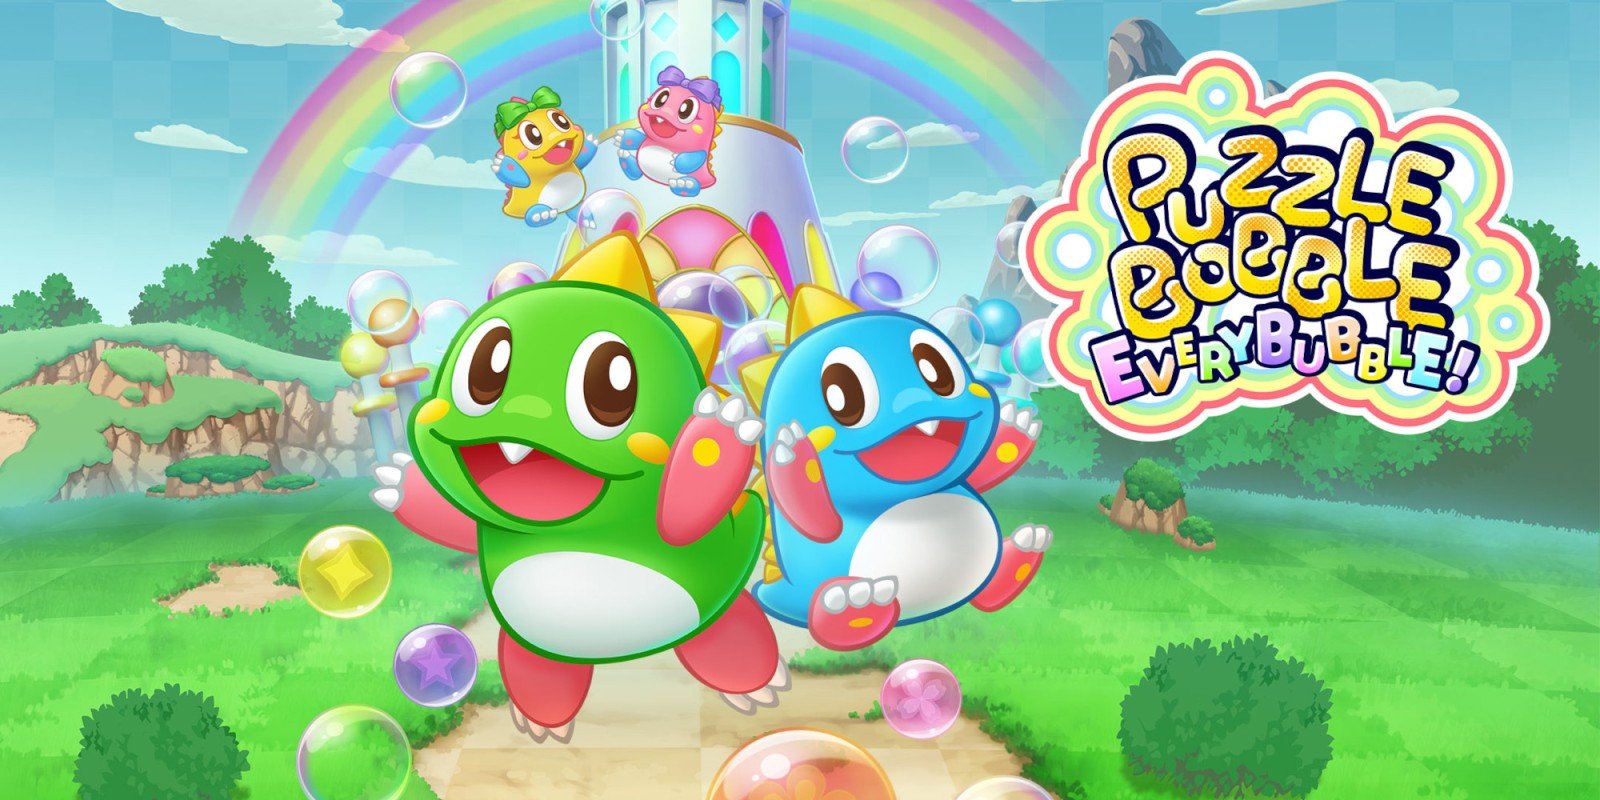 Puzzle Bobble Everybubble [Switch] Review – Snap Crackle Pop